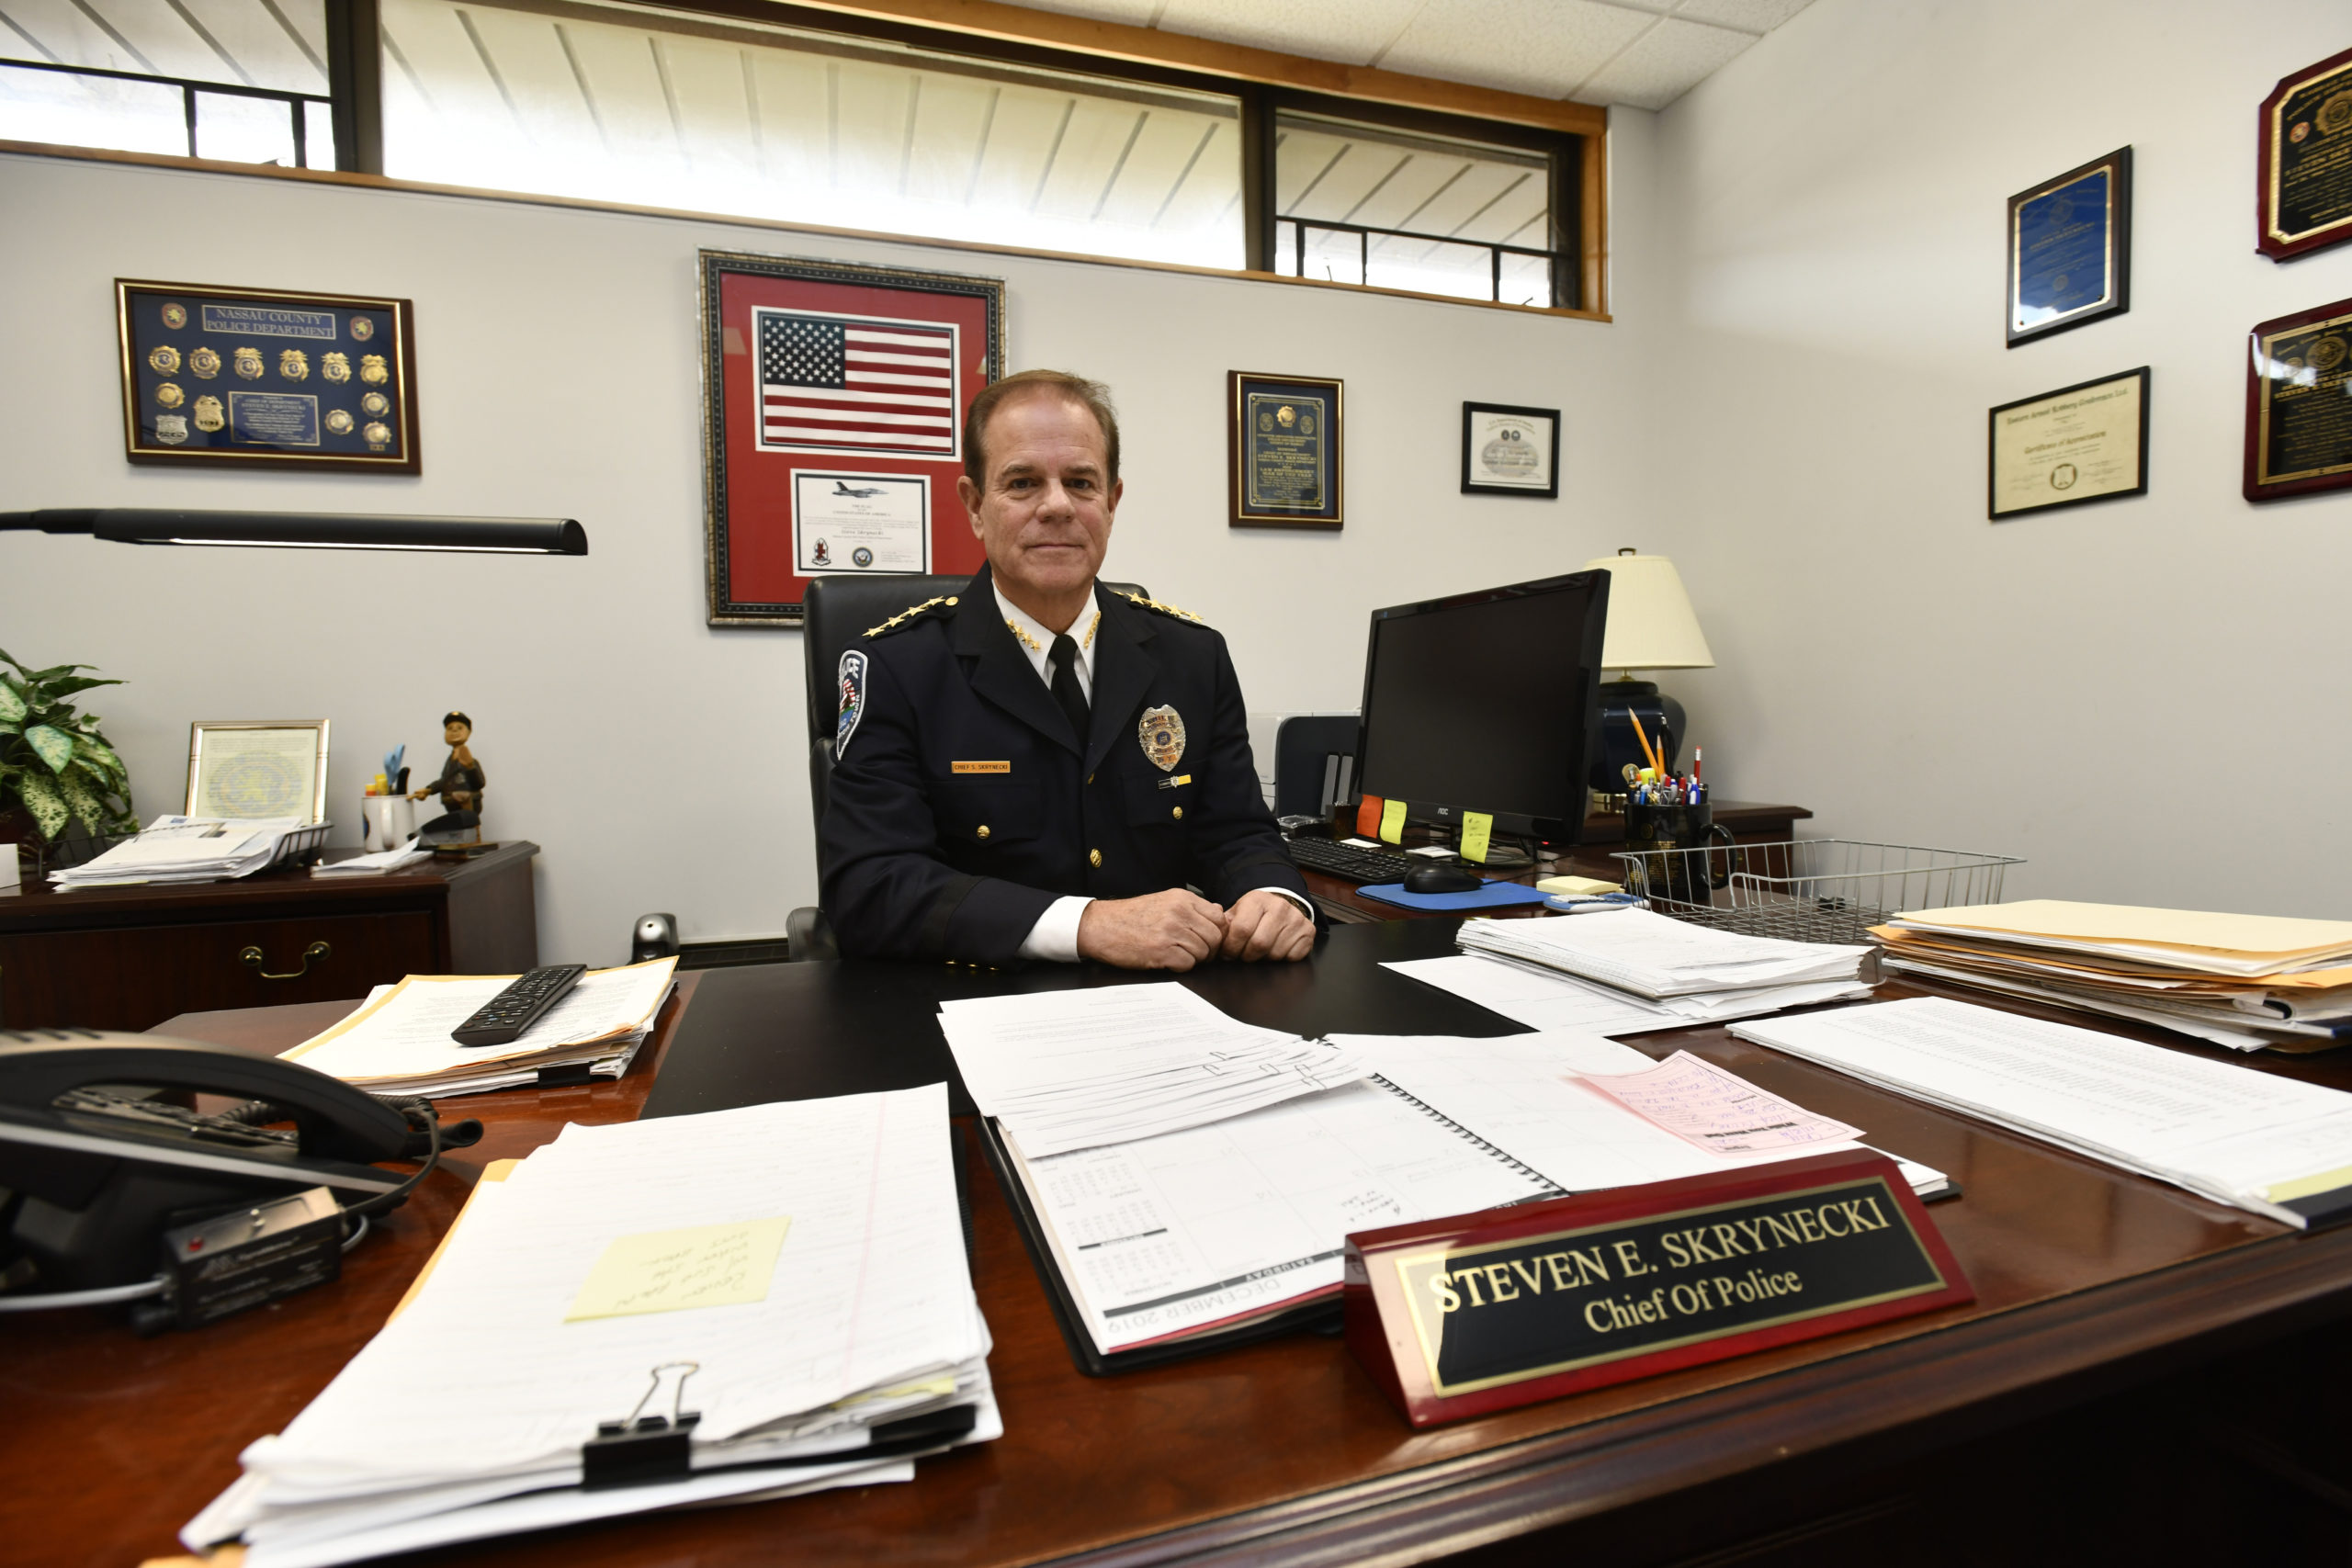 Southampton Town Police Chief Steven Skrynecki wants to get out ahead of any potential problem by stepping up local communication and raising awareness about the dangers of methamphetamine.   DANA SHAW